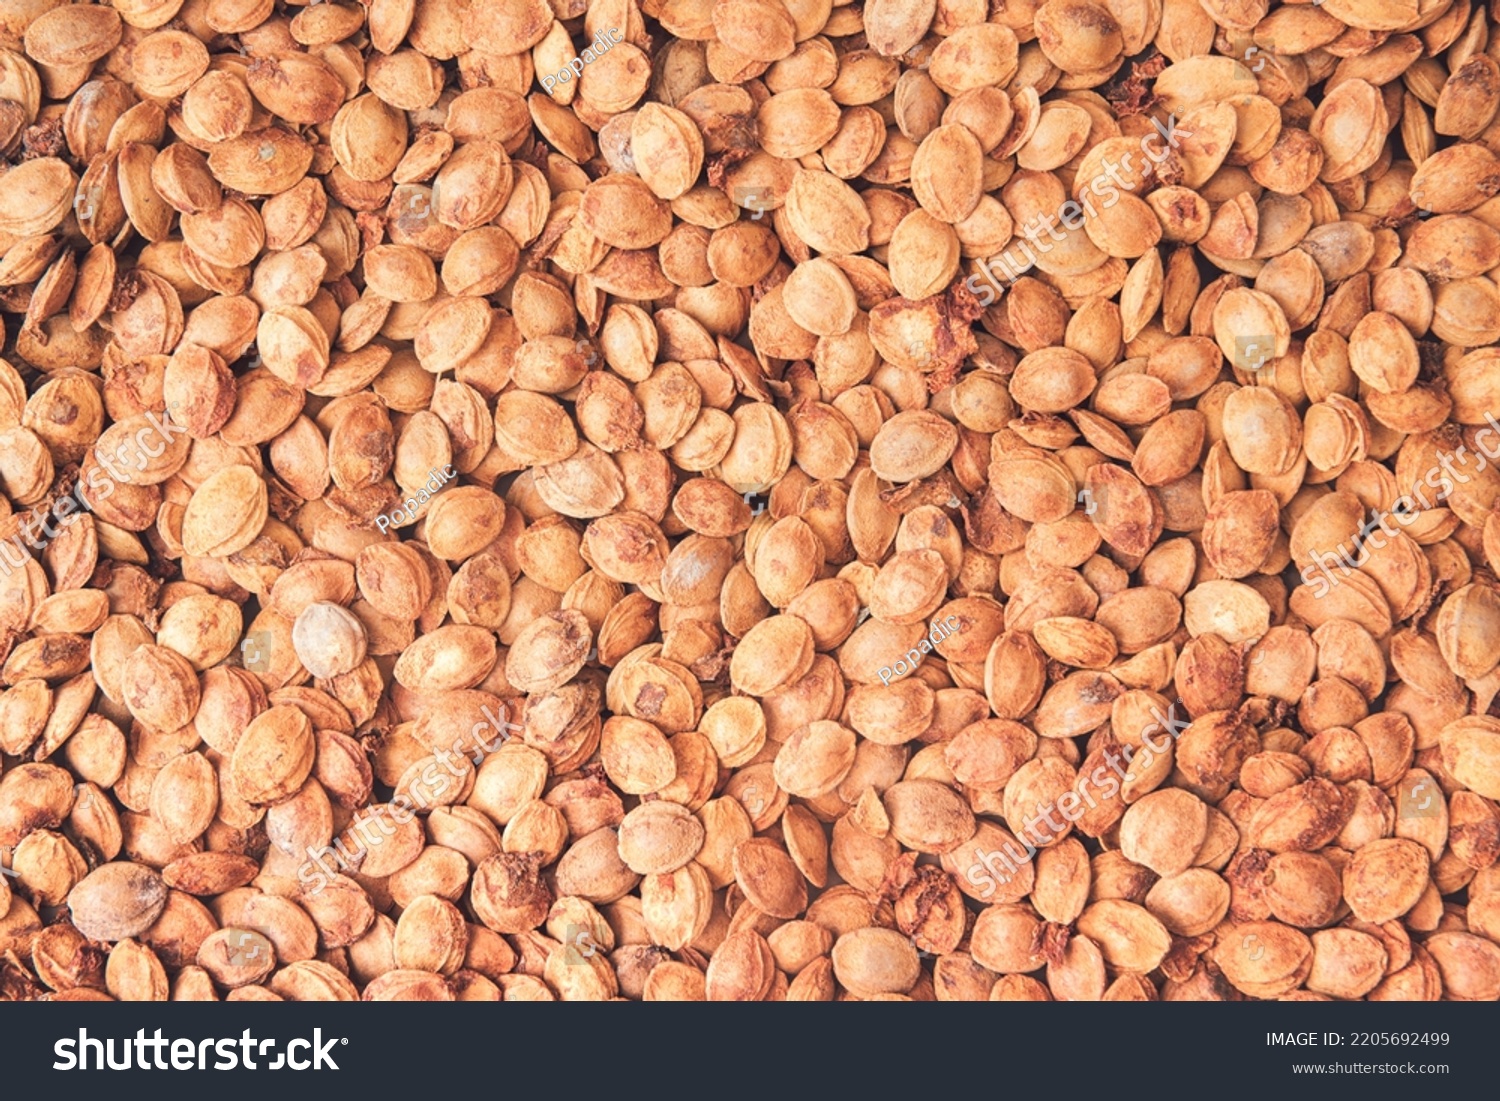 Apricot kernels background. Minimal fruit concept with kernels. A heap of apricot pits, apricot kernels oil. Organic fruit wallpaper. Organic fruit seeds. Flat lay. Healty food. #2205692499